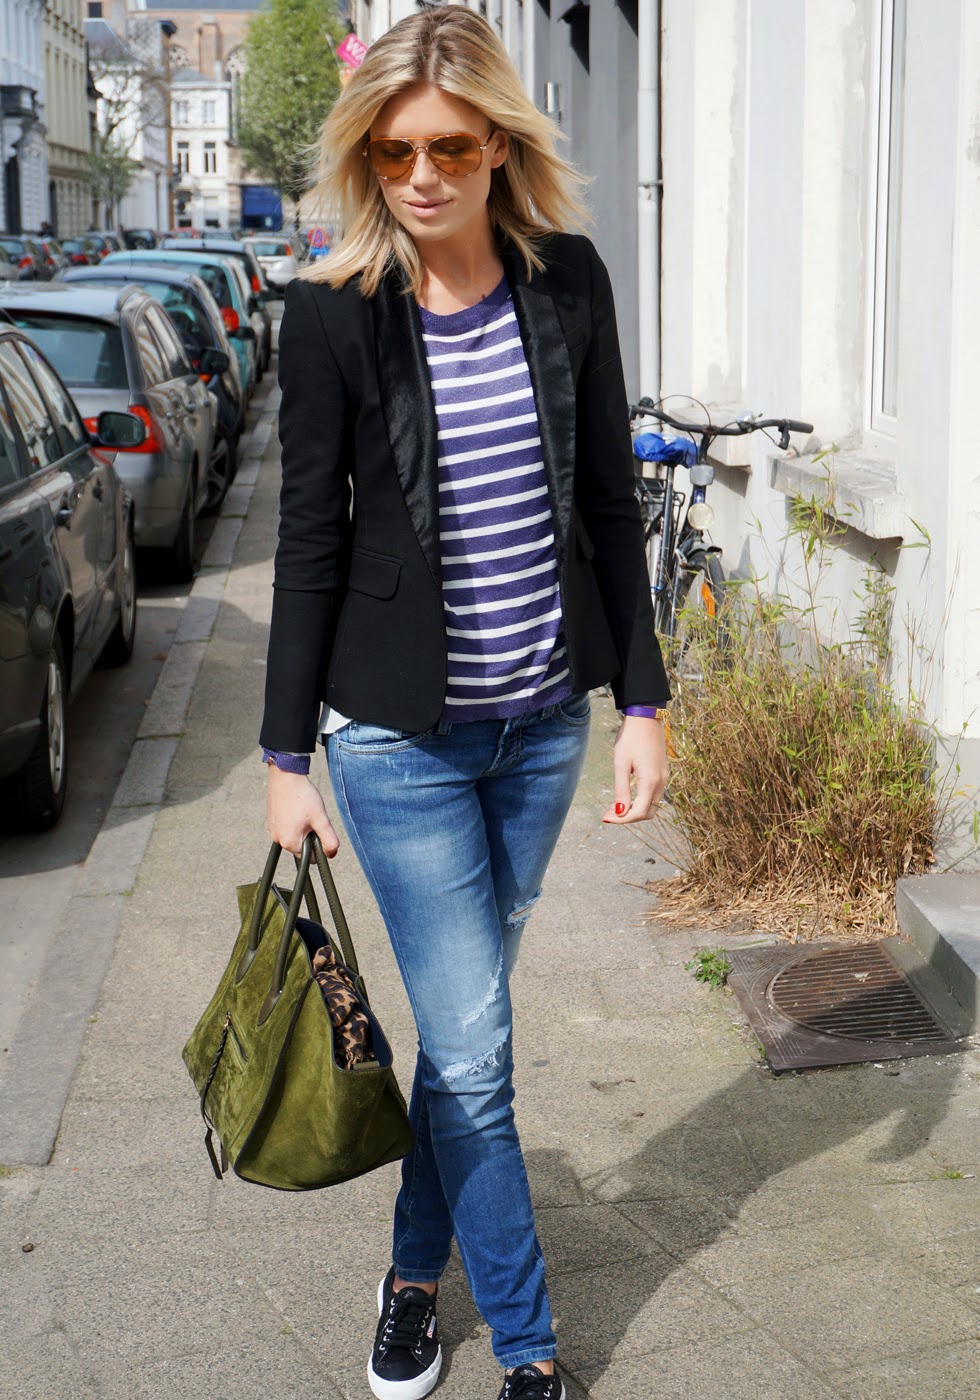 Mirror of Fashion: OUTFIT OF THE DAY // SHIMMERING STRIPES